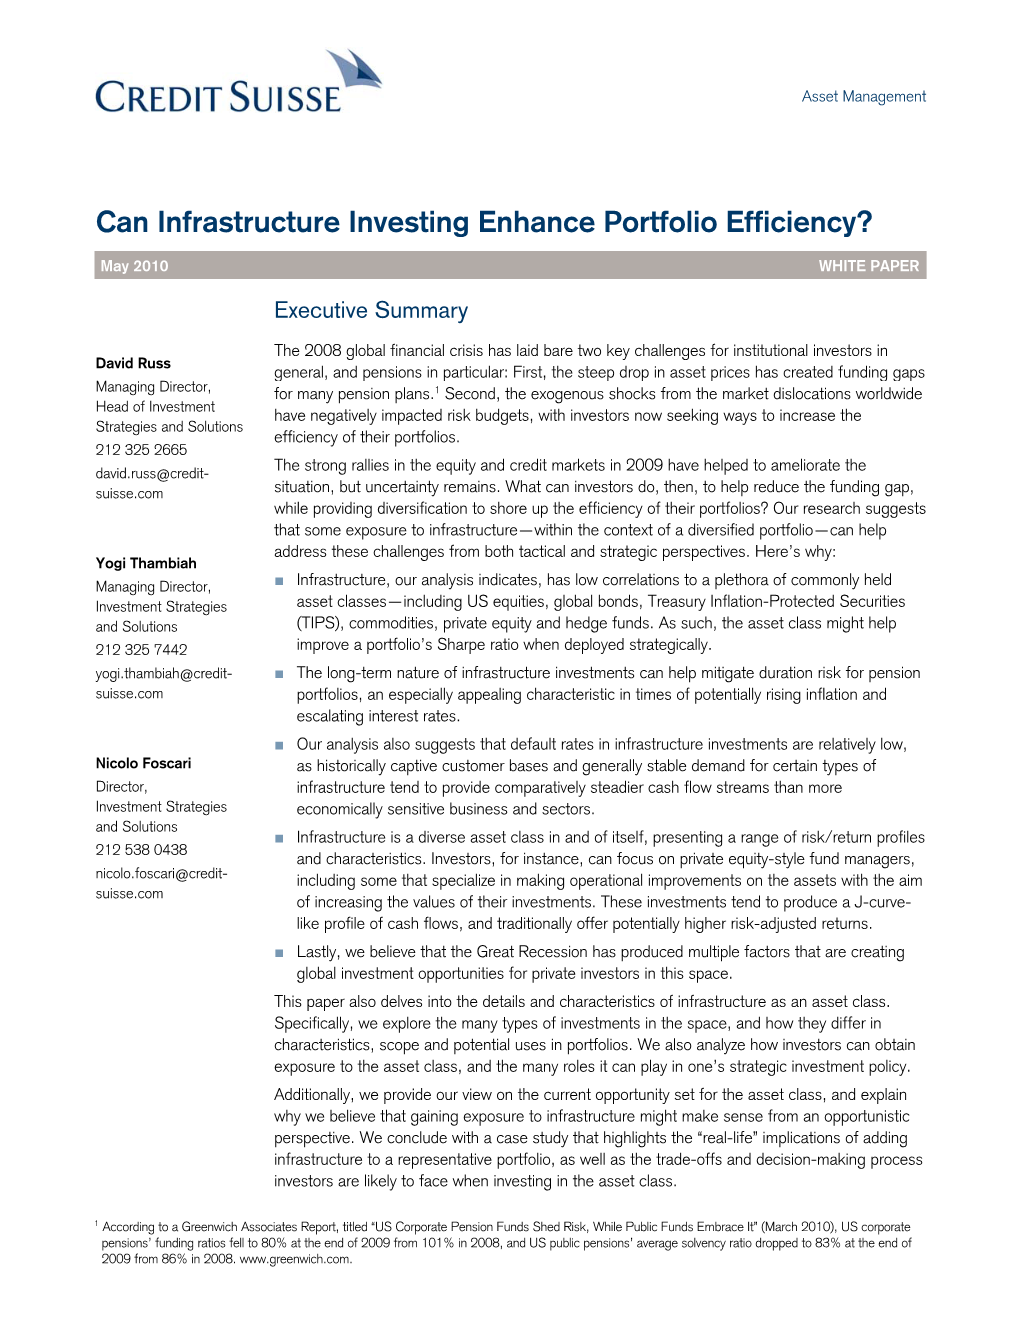 Can Infrastructure Investing Enhance Portfolio Efficiency?